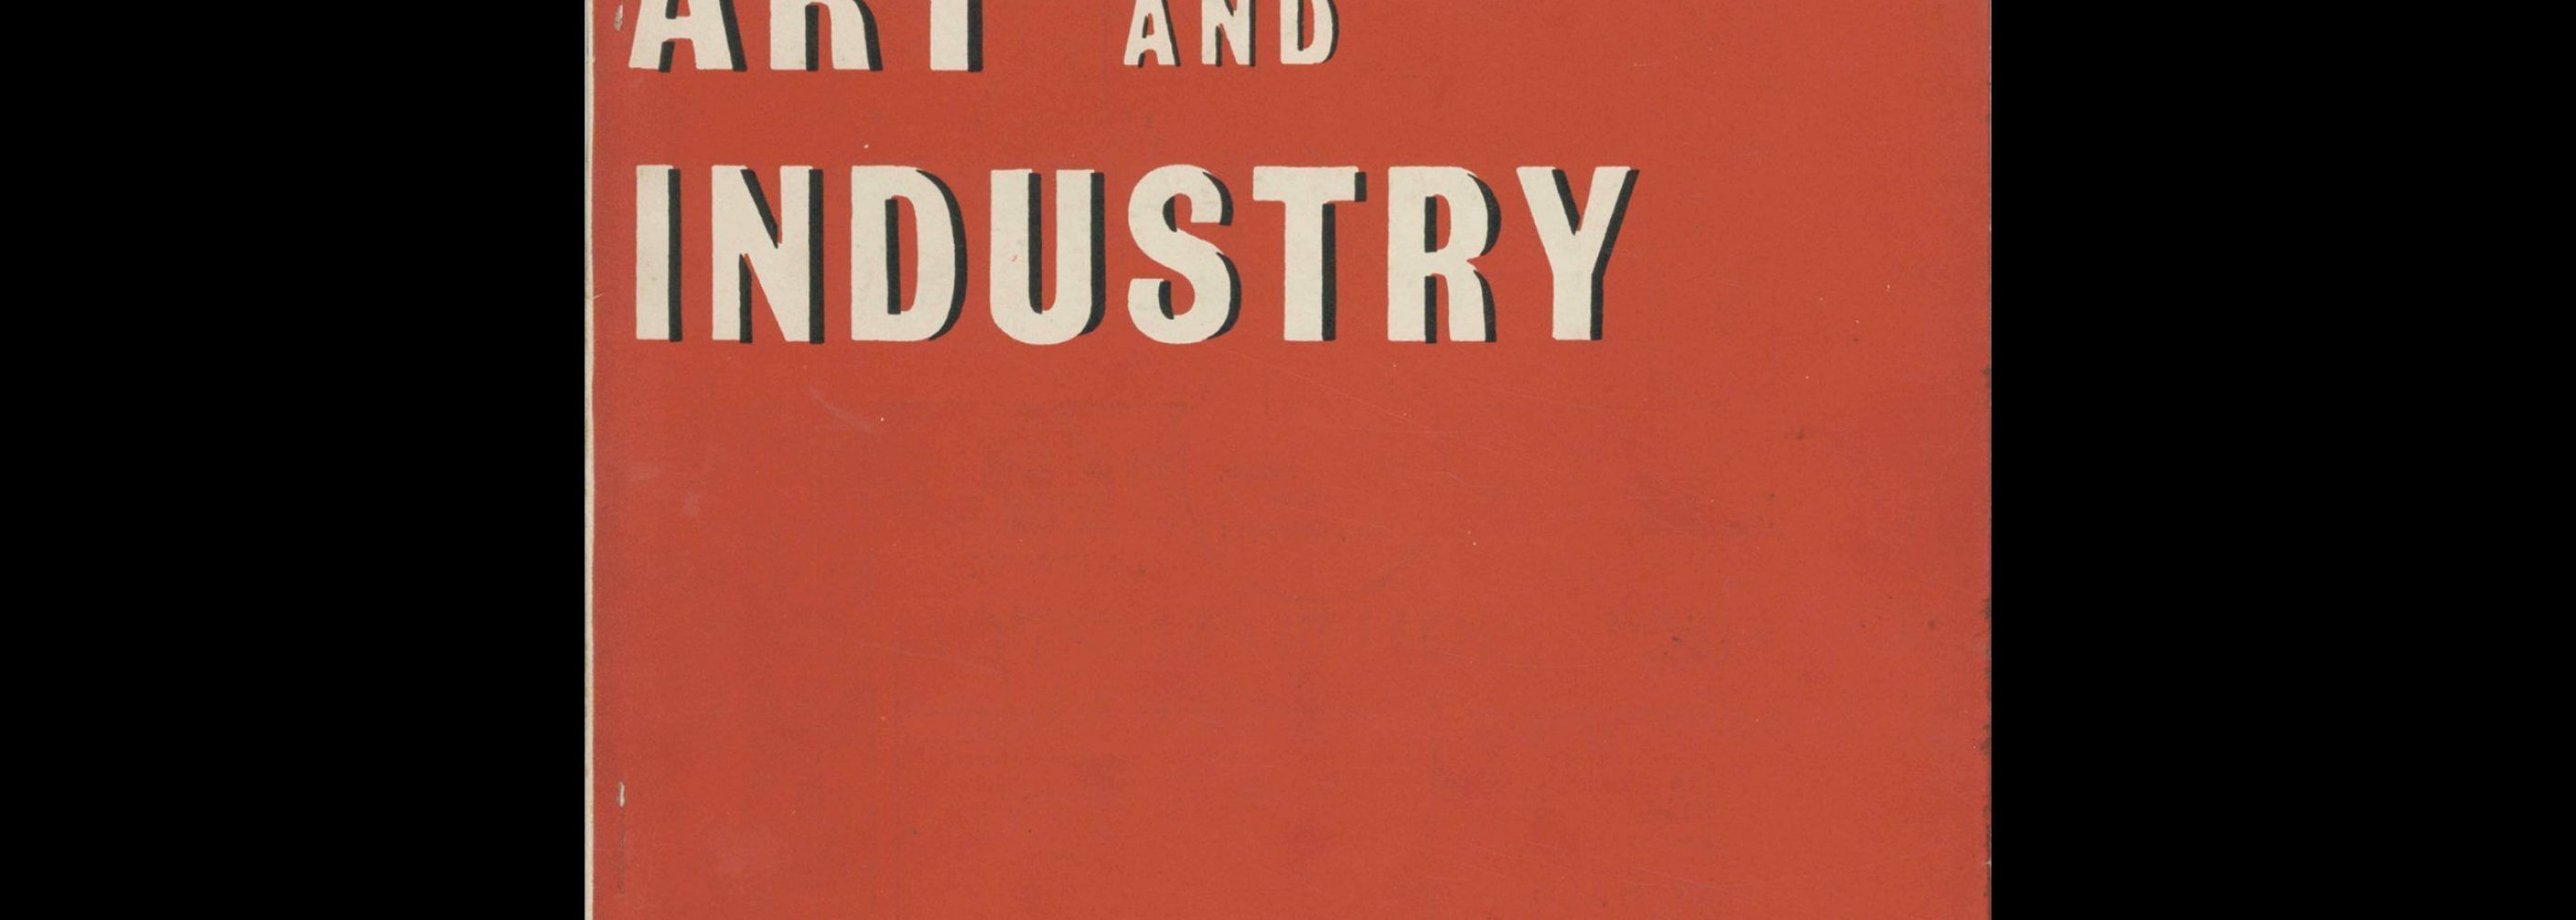 Commercial Art and Industry 108, June 1935